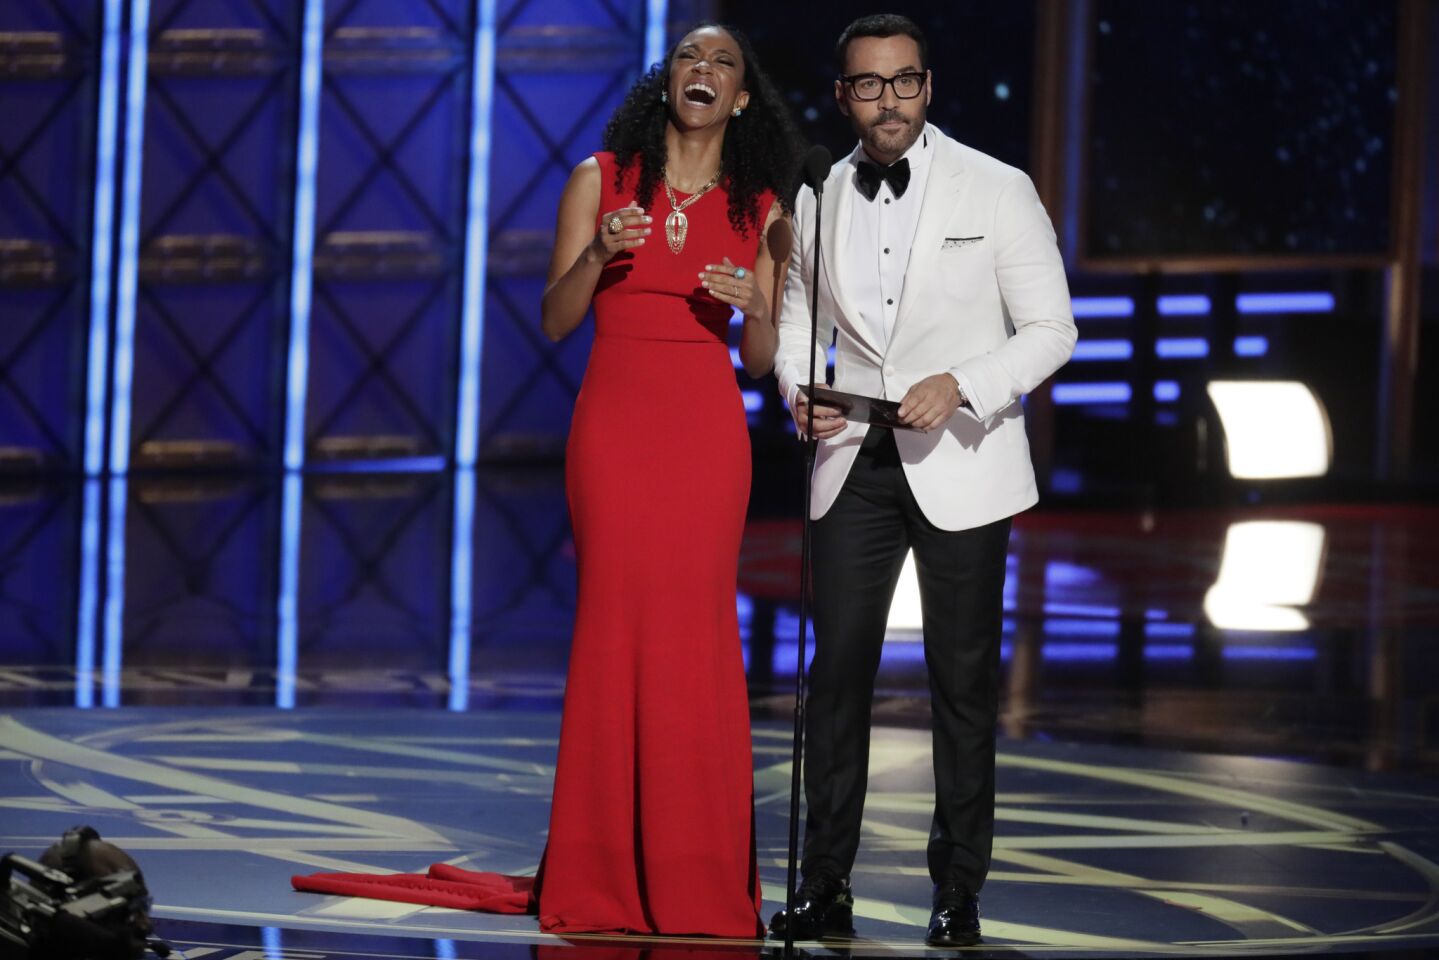 "Star Trek: Discovery's" Sonequa Martin-Green and "Entourage" actor Jeremy Piven during the show.